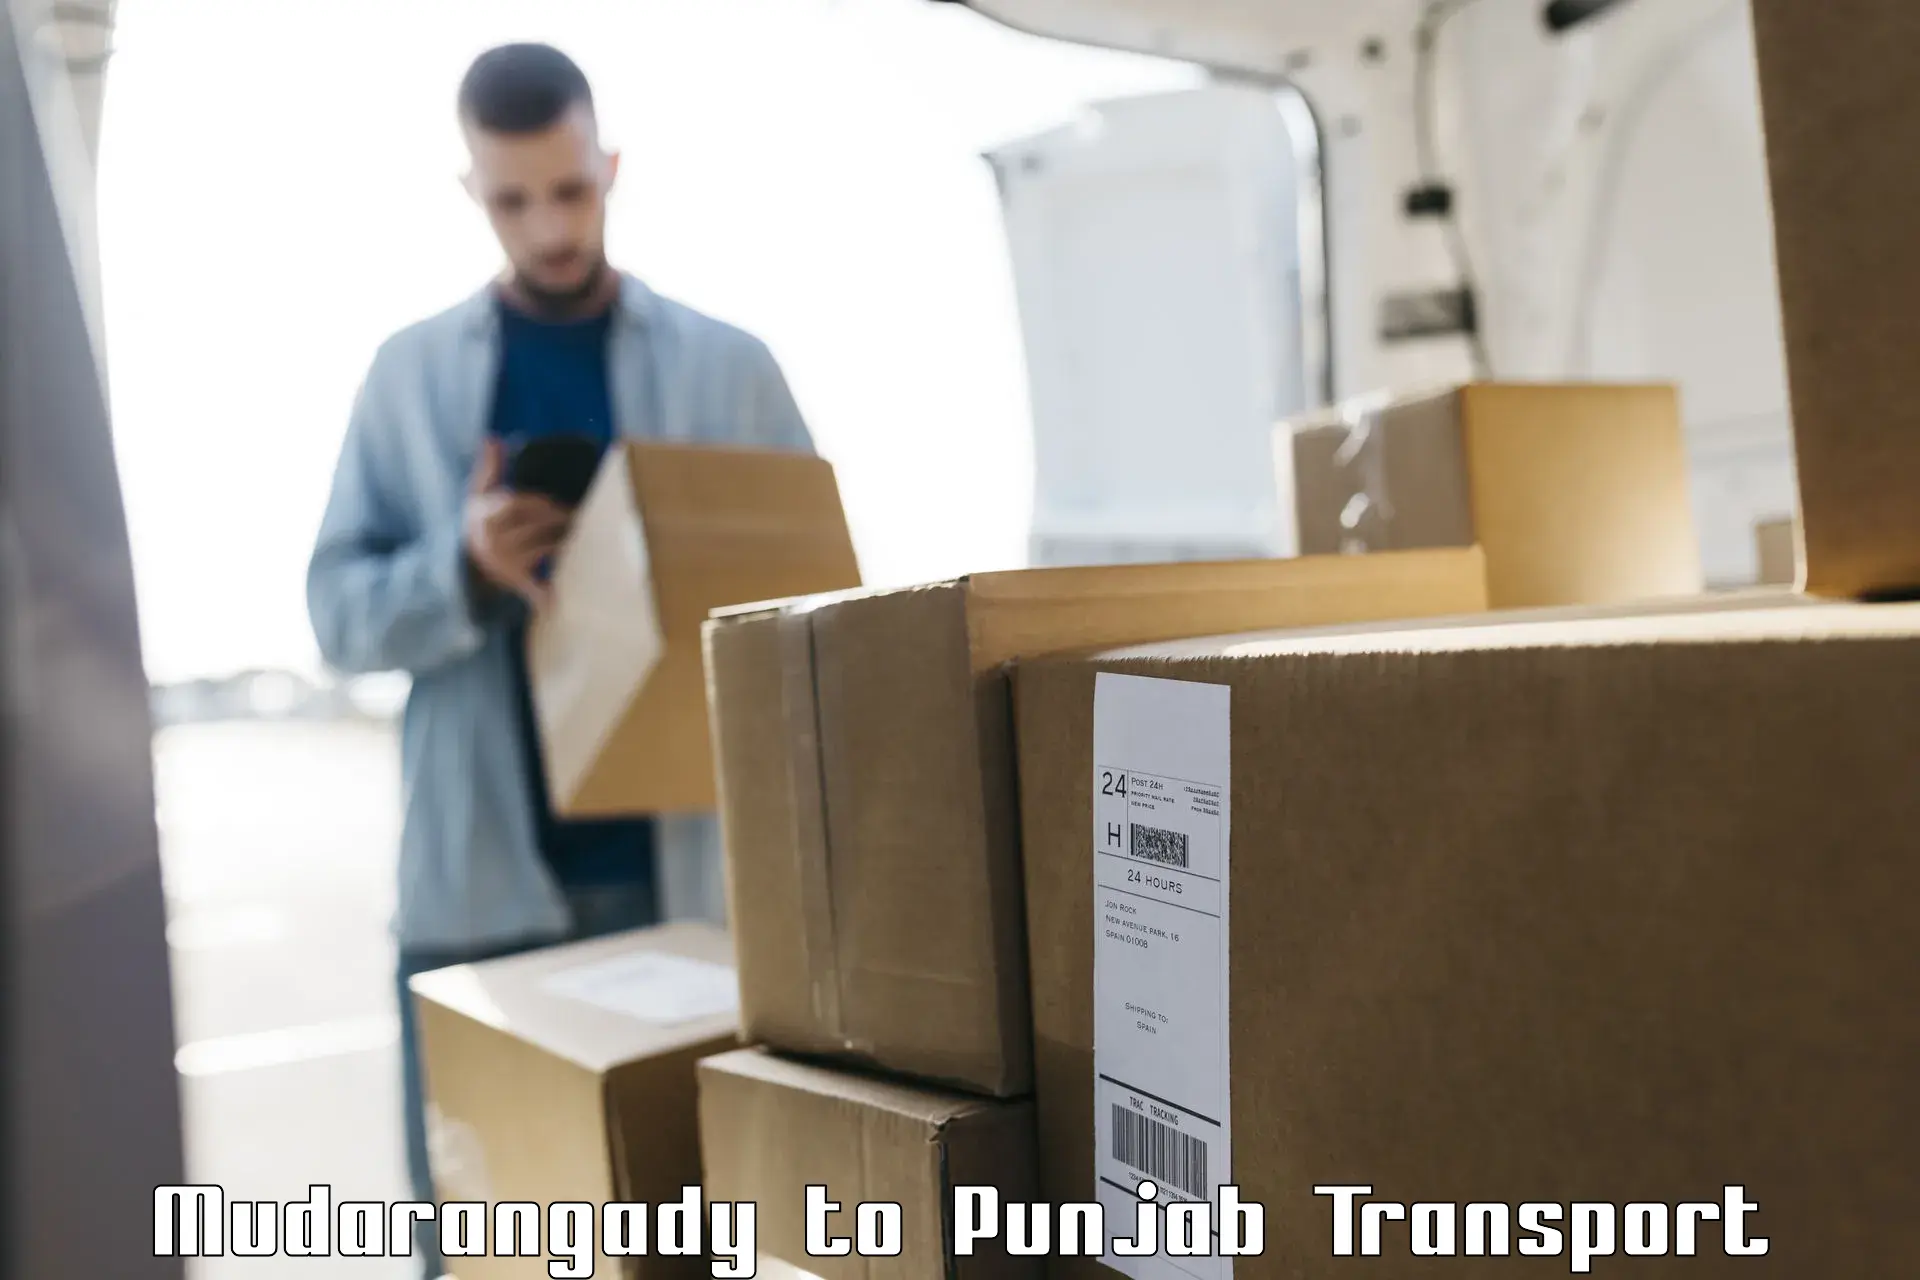 Shipping services Mudarangady to Punjab Agricultural University Ludhiana